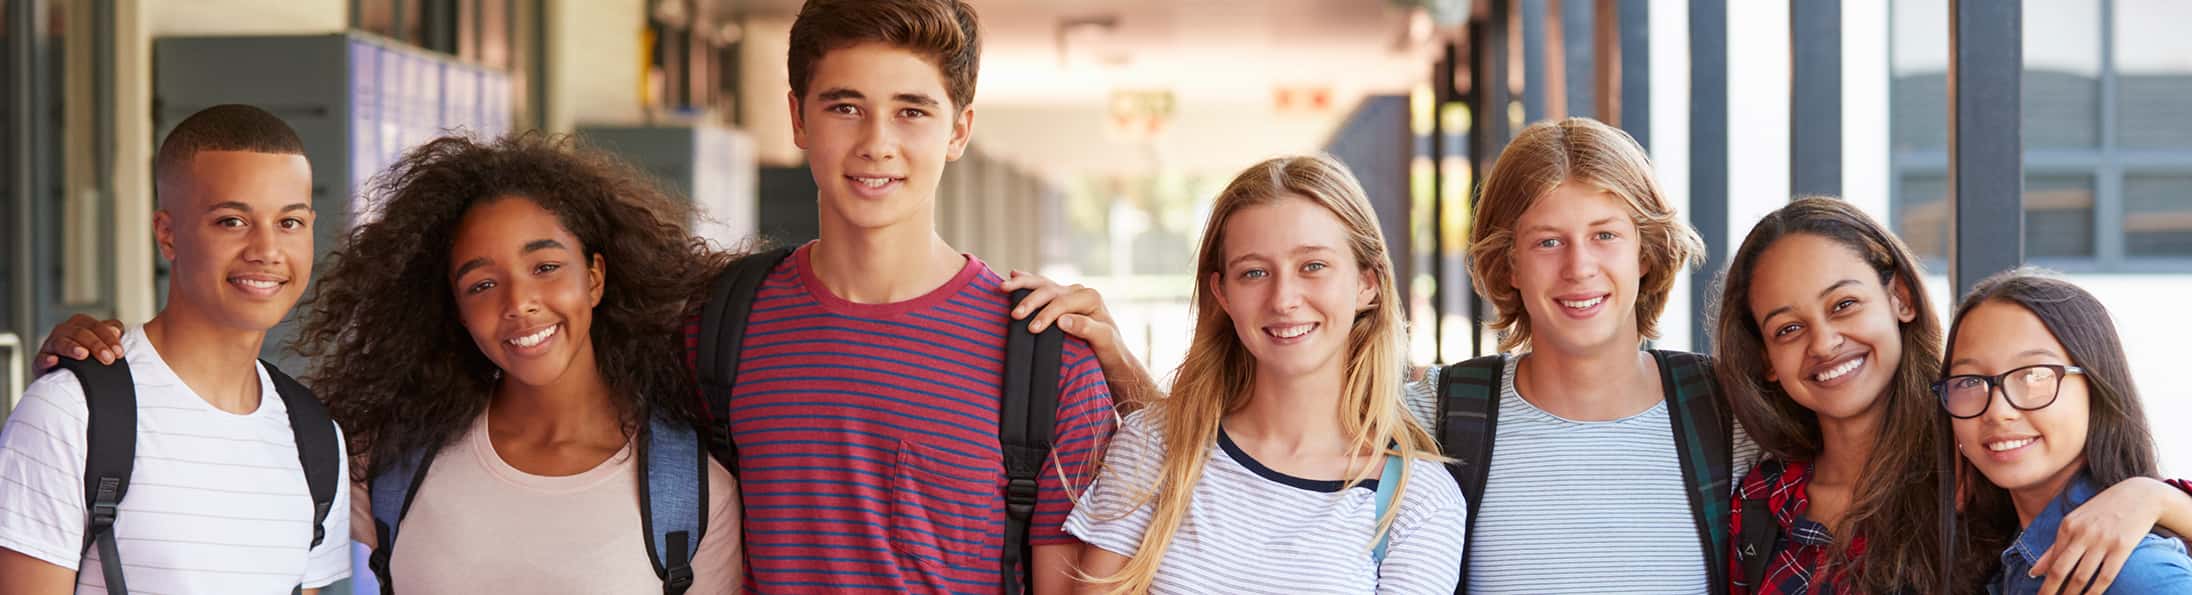 Smiling students standing together in a school hallway